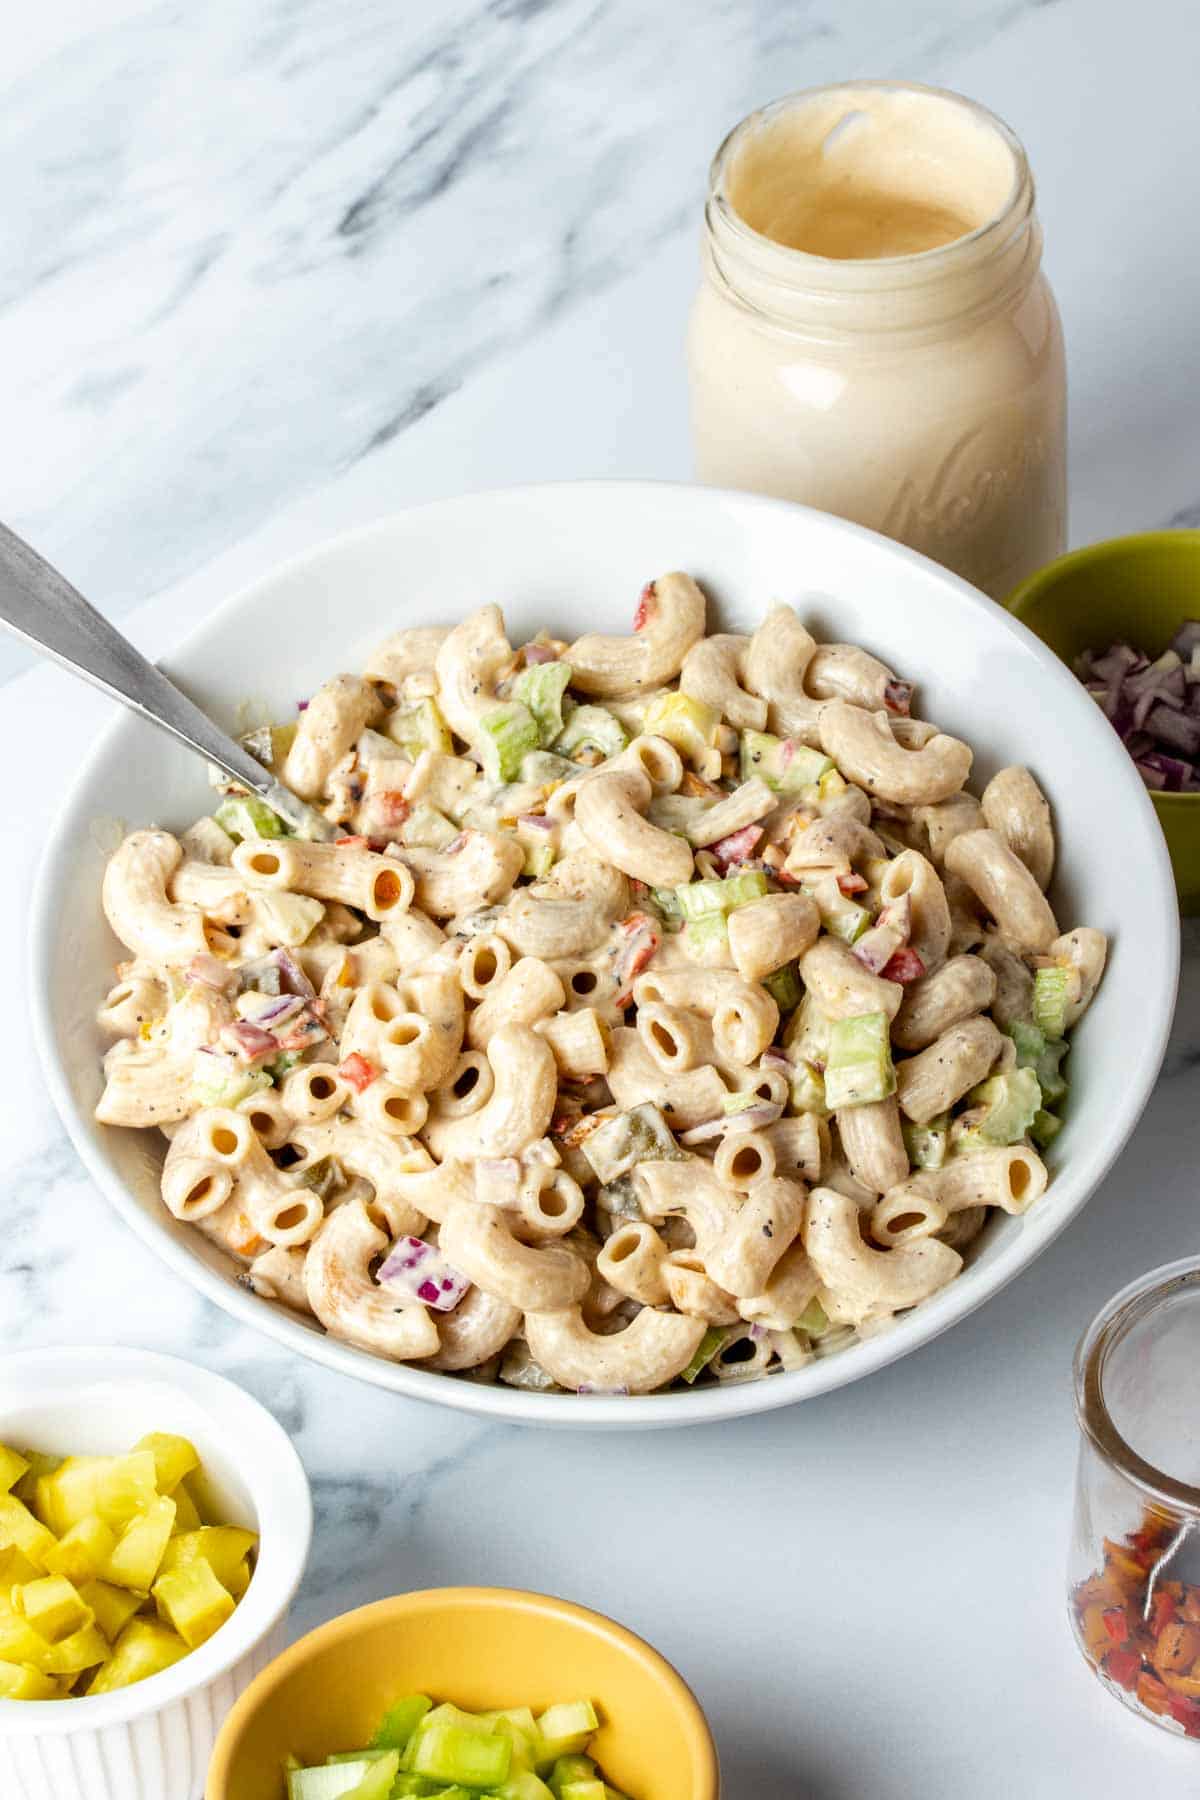 Spoon mixing creamy macaroni salad ingredients together in a white bowl.